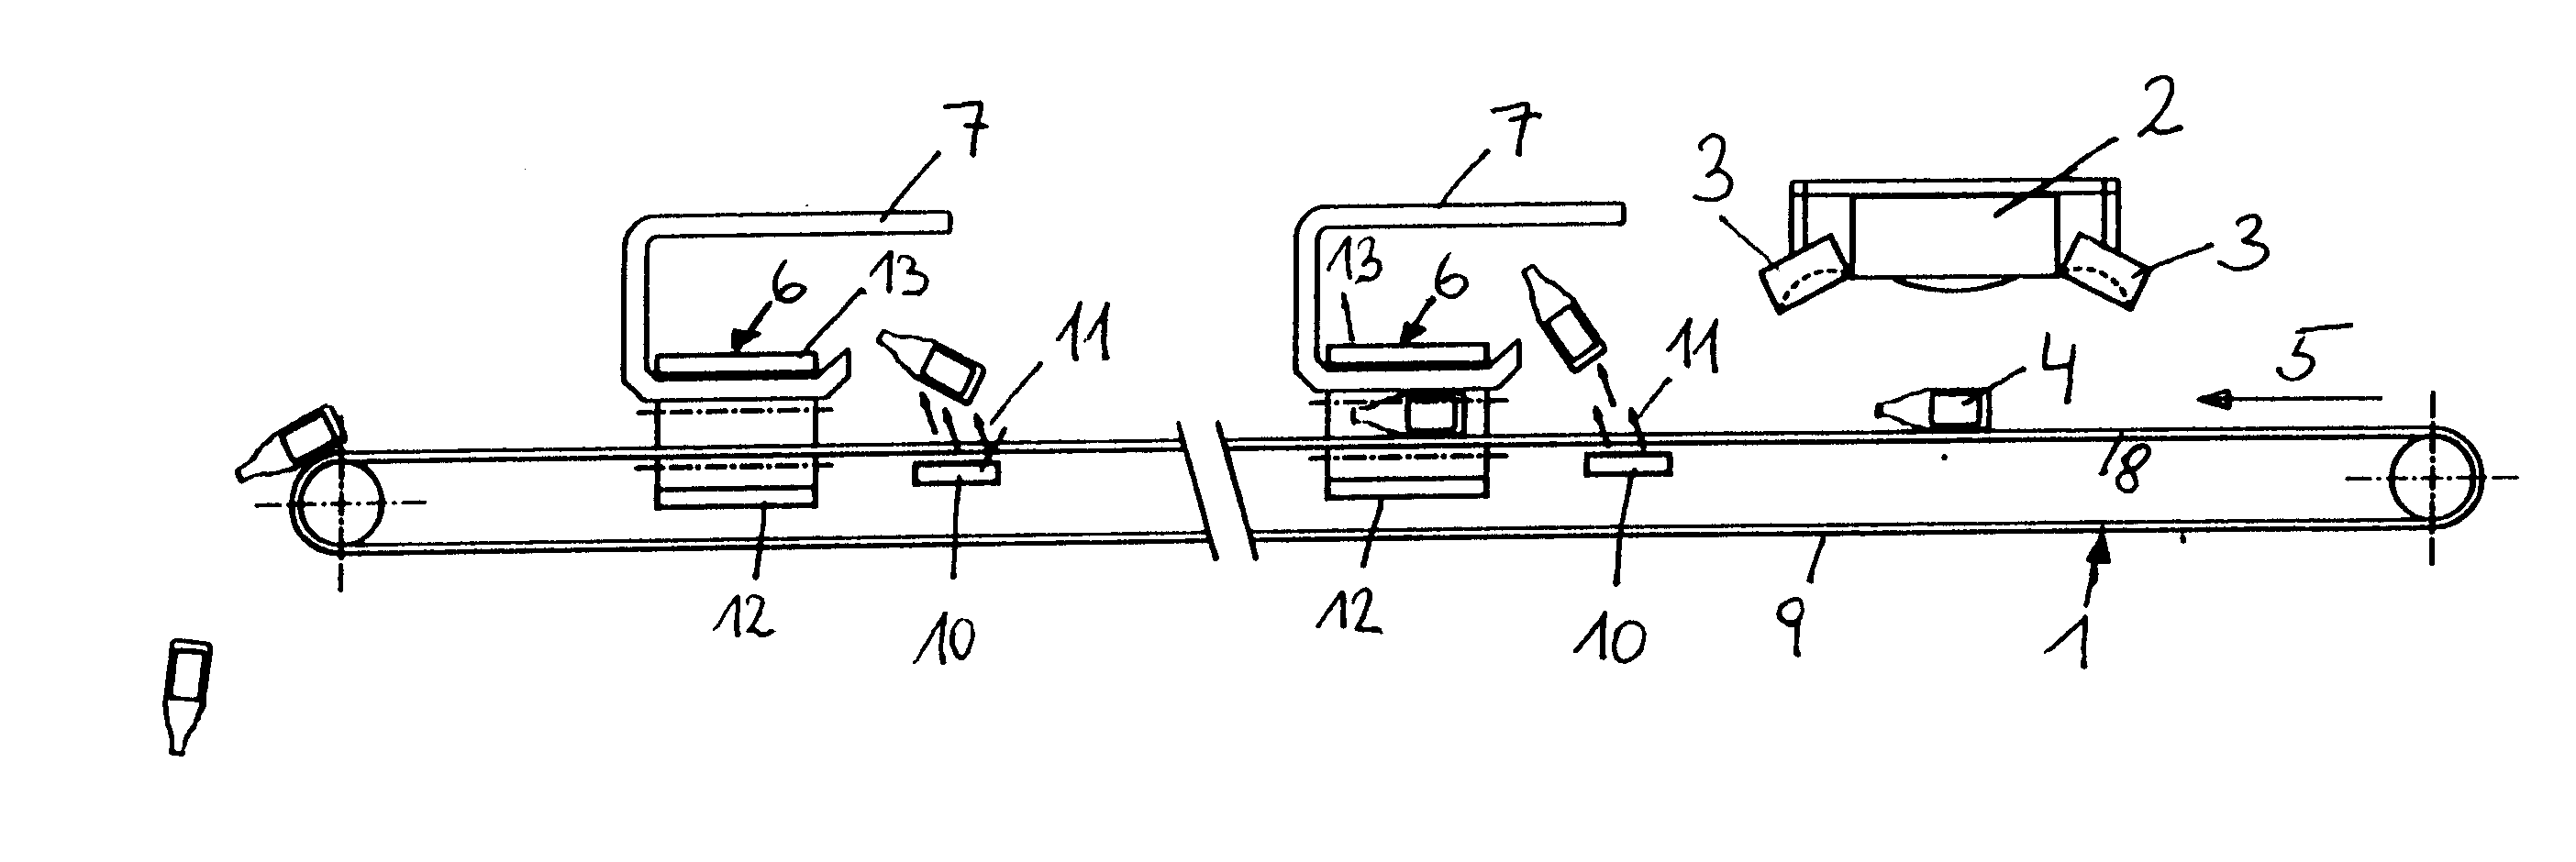 Apparatus for sorting waste materials